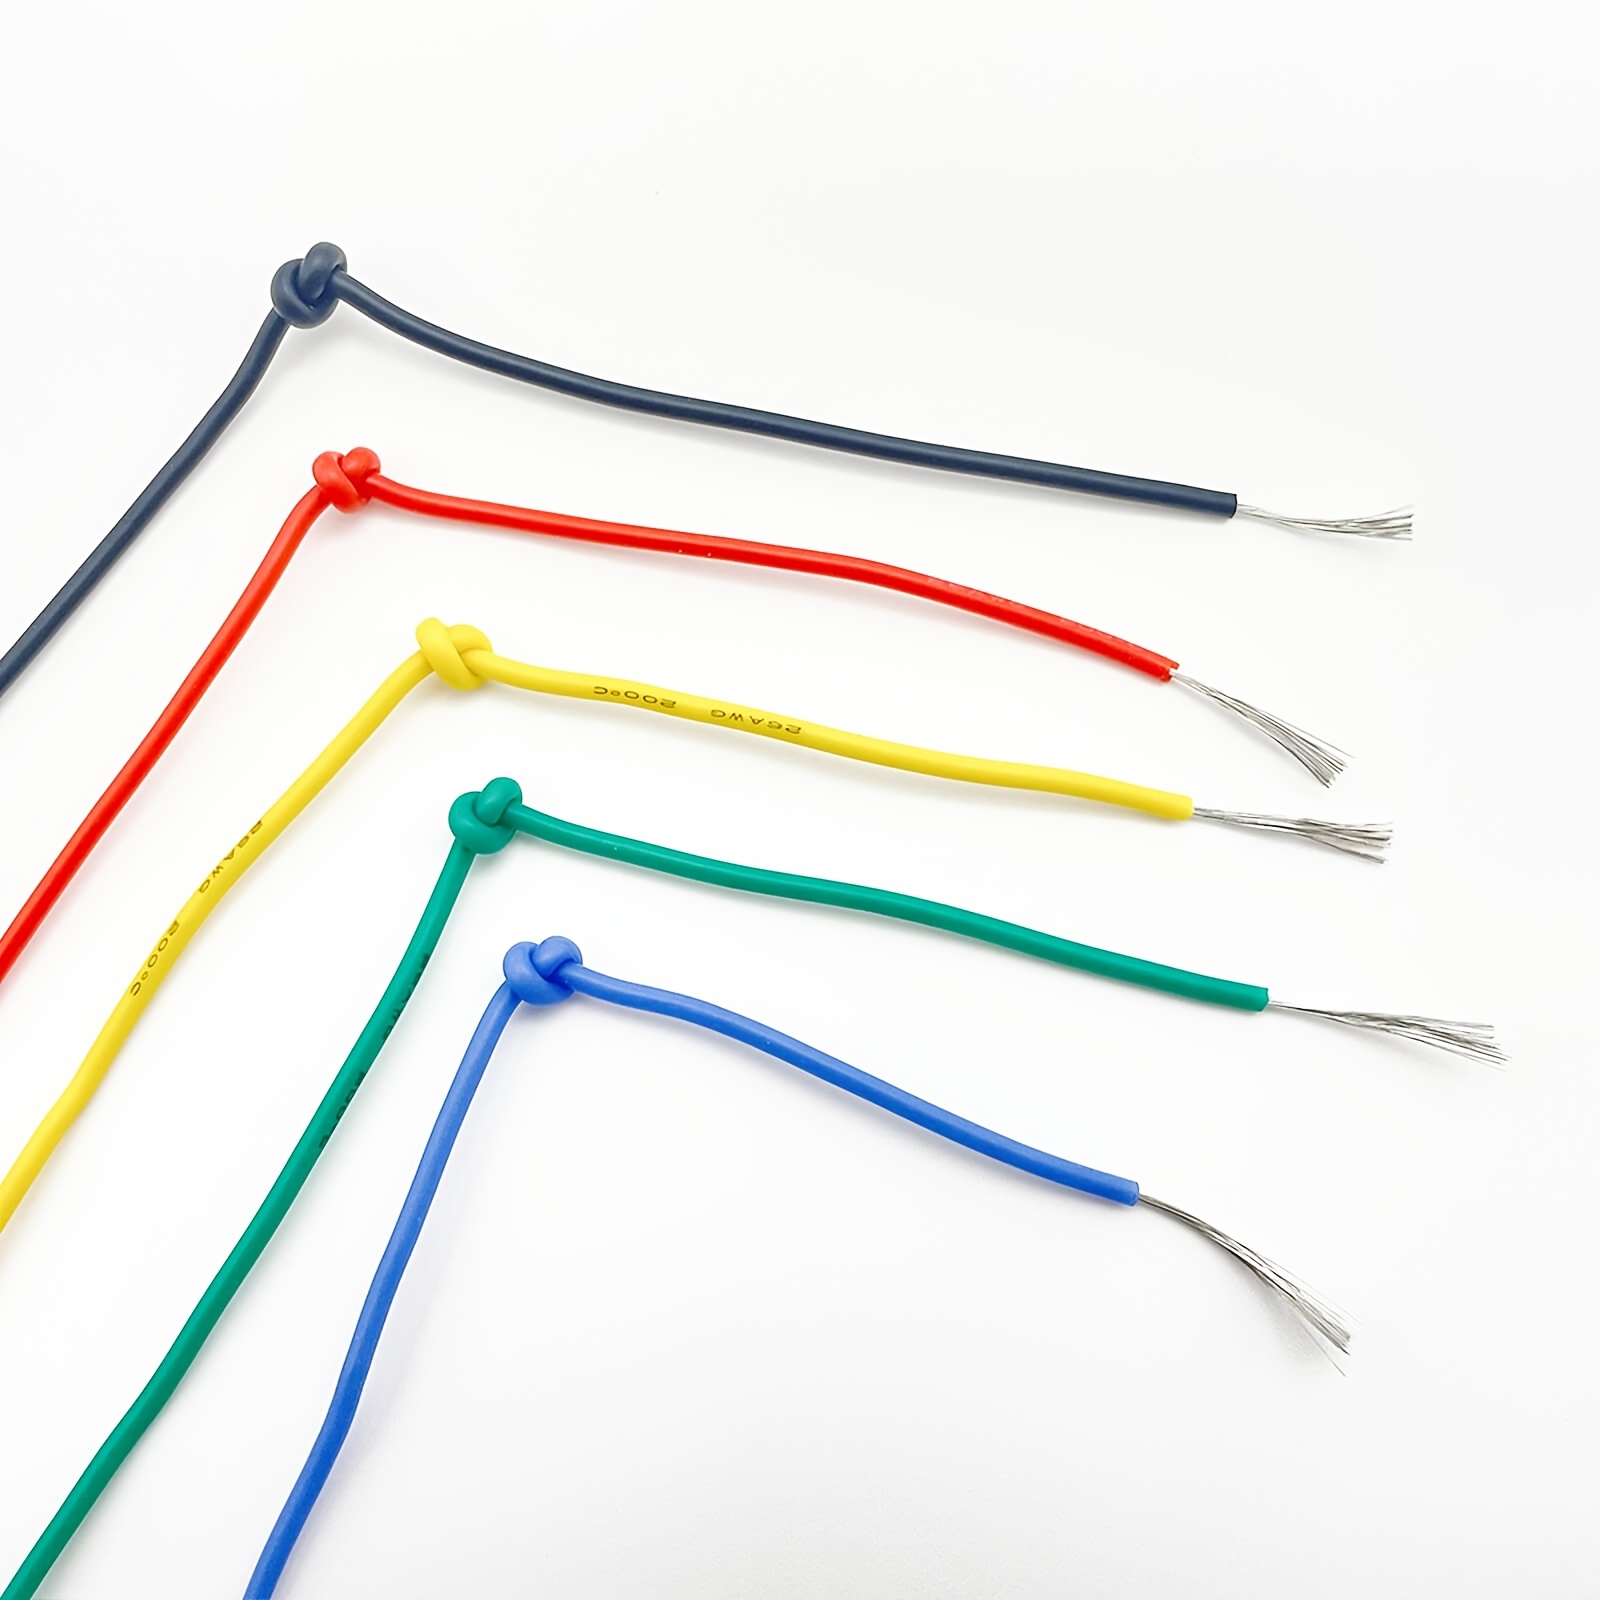 26AWG Wire Flexible Silicone Hookup Insulated 5 Color Cable